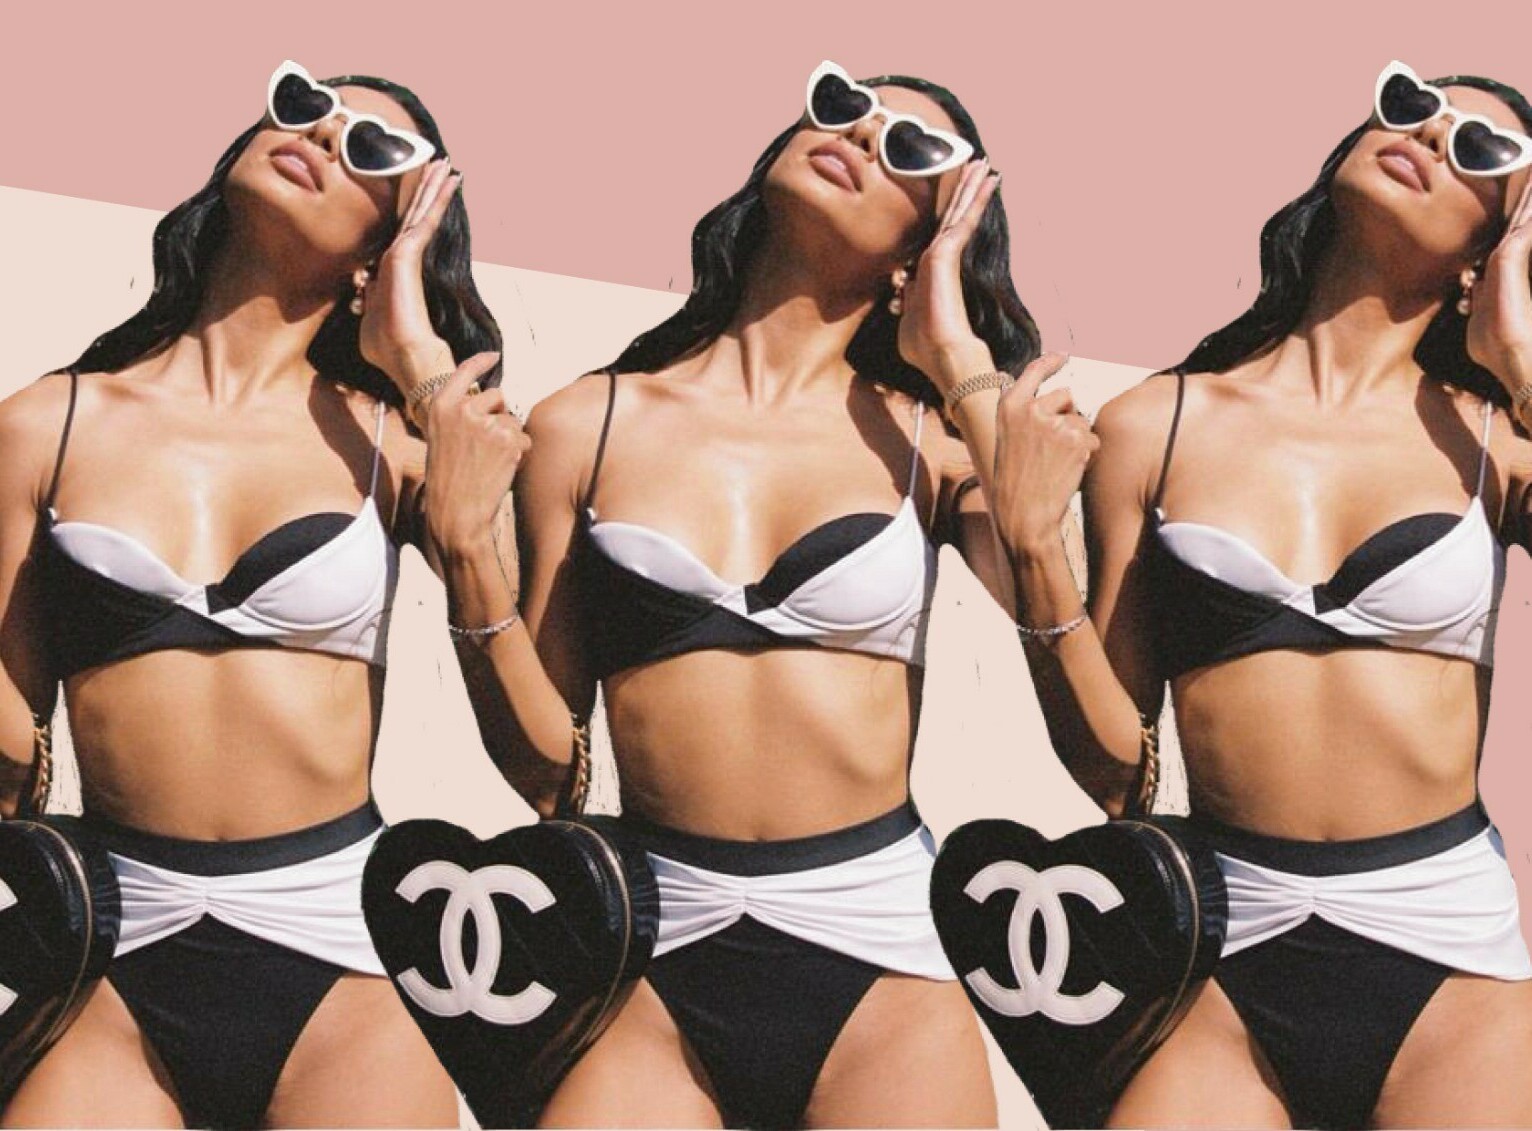 The SS21 Trend You Need To Know About - Styling Swimwear - Voir Fashion